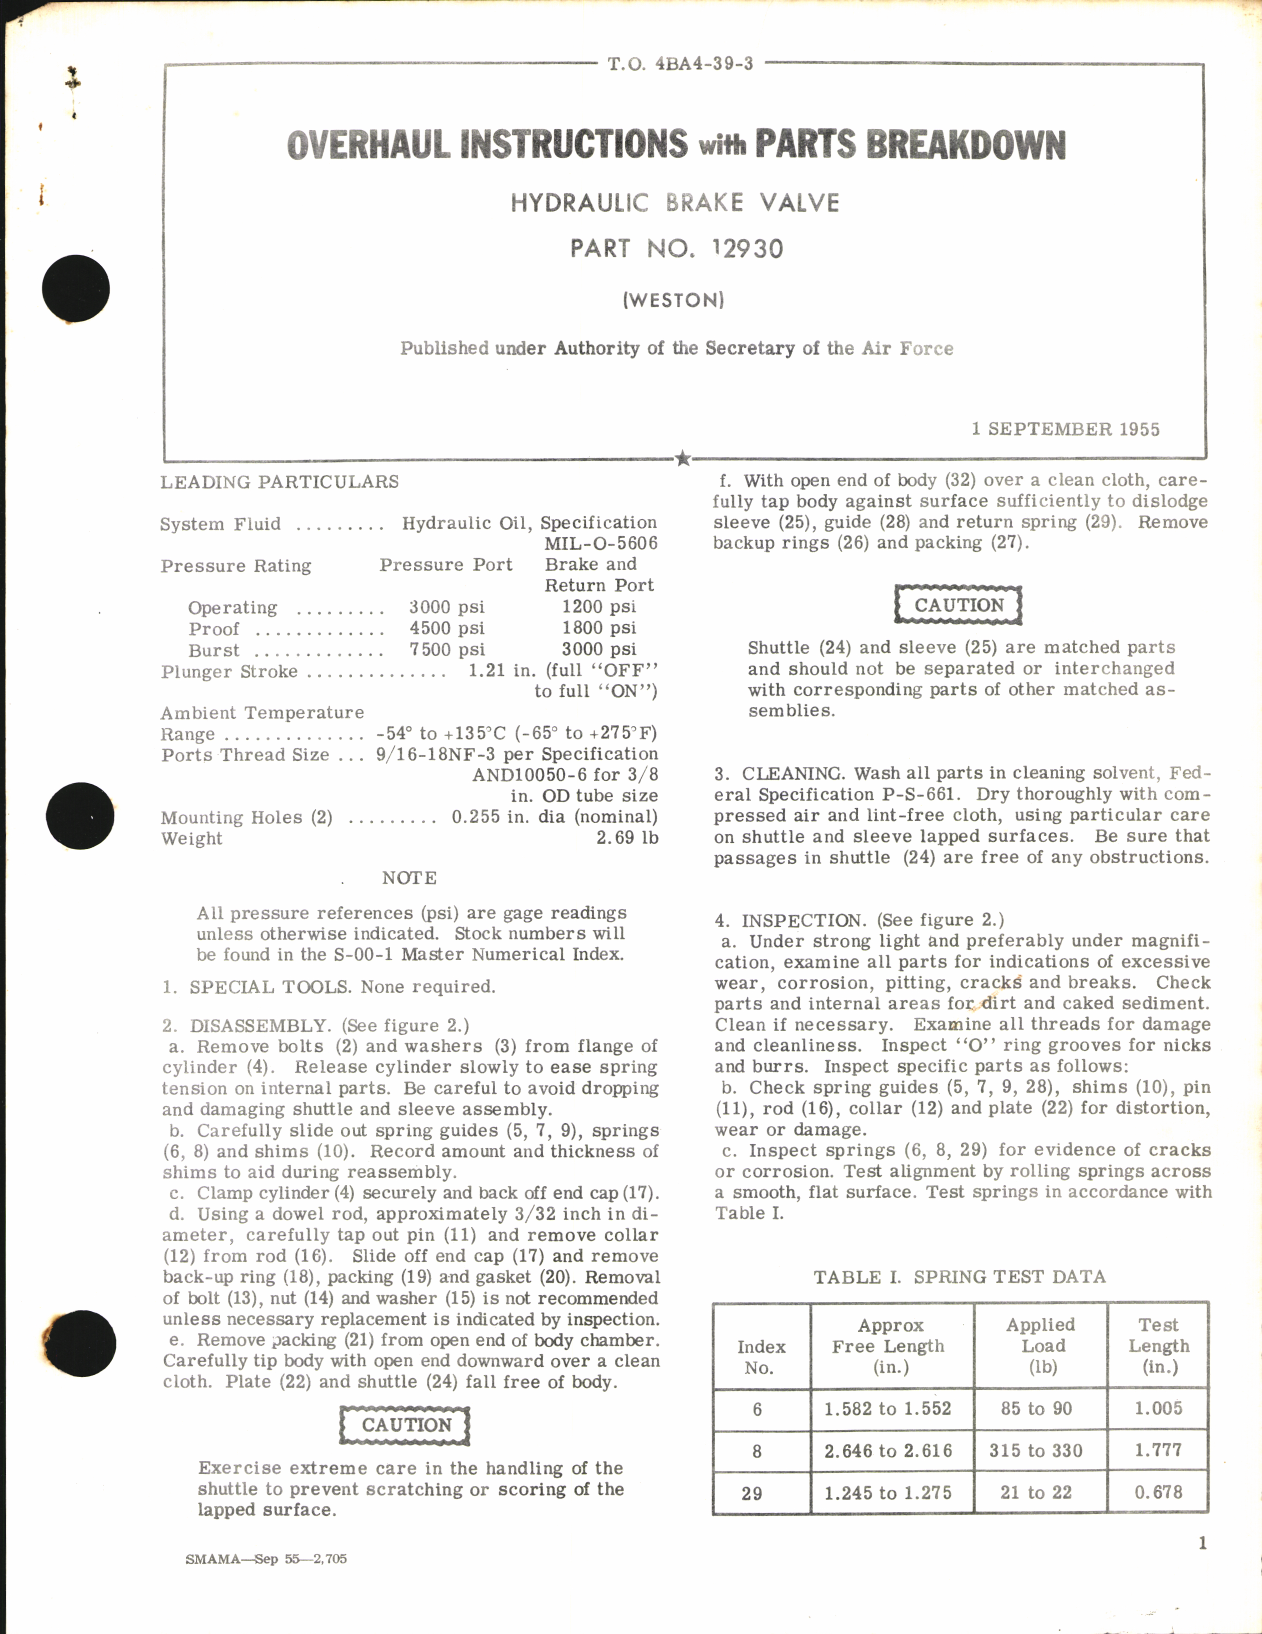 Sample page 1 from AirCorps Library document: Overhaul Instructions with Parts Breakdown for Hydraulic Brake Valve